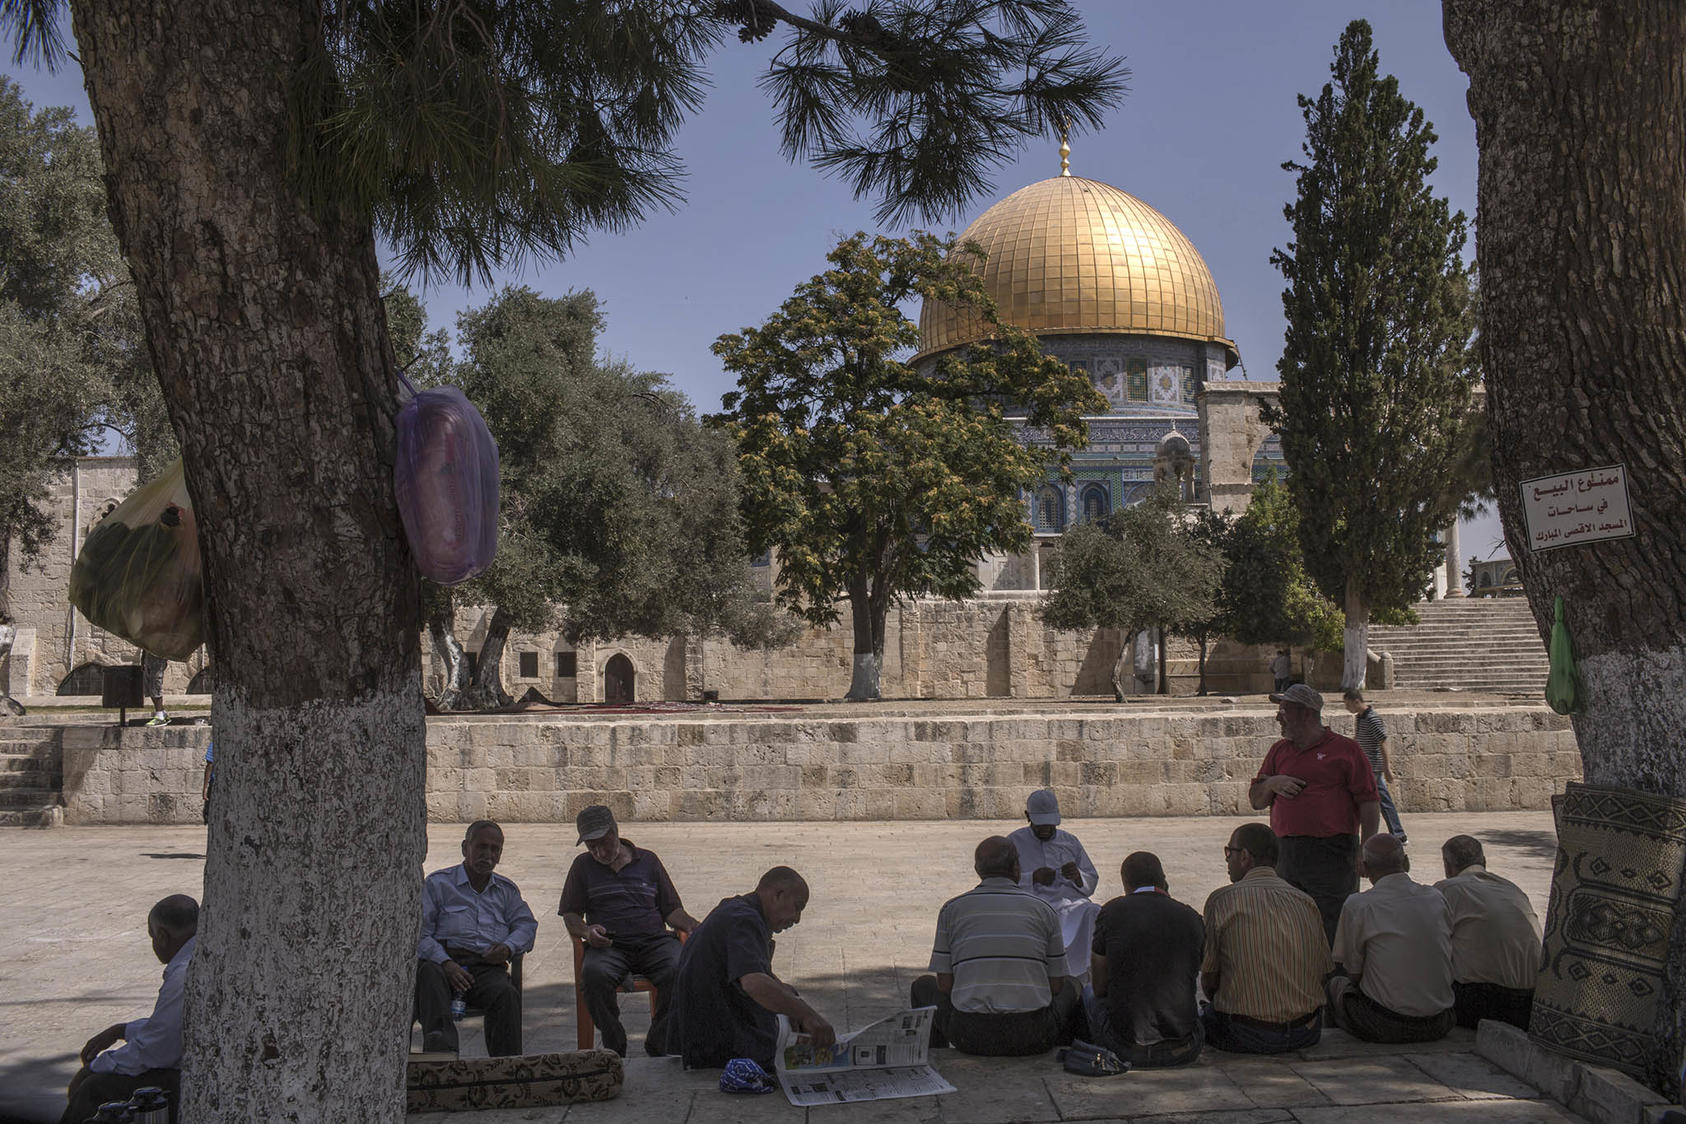 Locals sit near the Dome of the Rock in the Al-Aqsa Mosque compound in the Old City of Jerusalem, July 28, 2015. (Uriel Sinai/The New York Times)